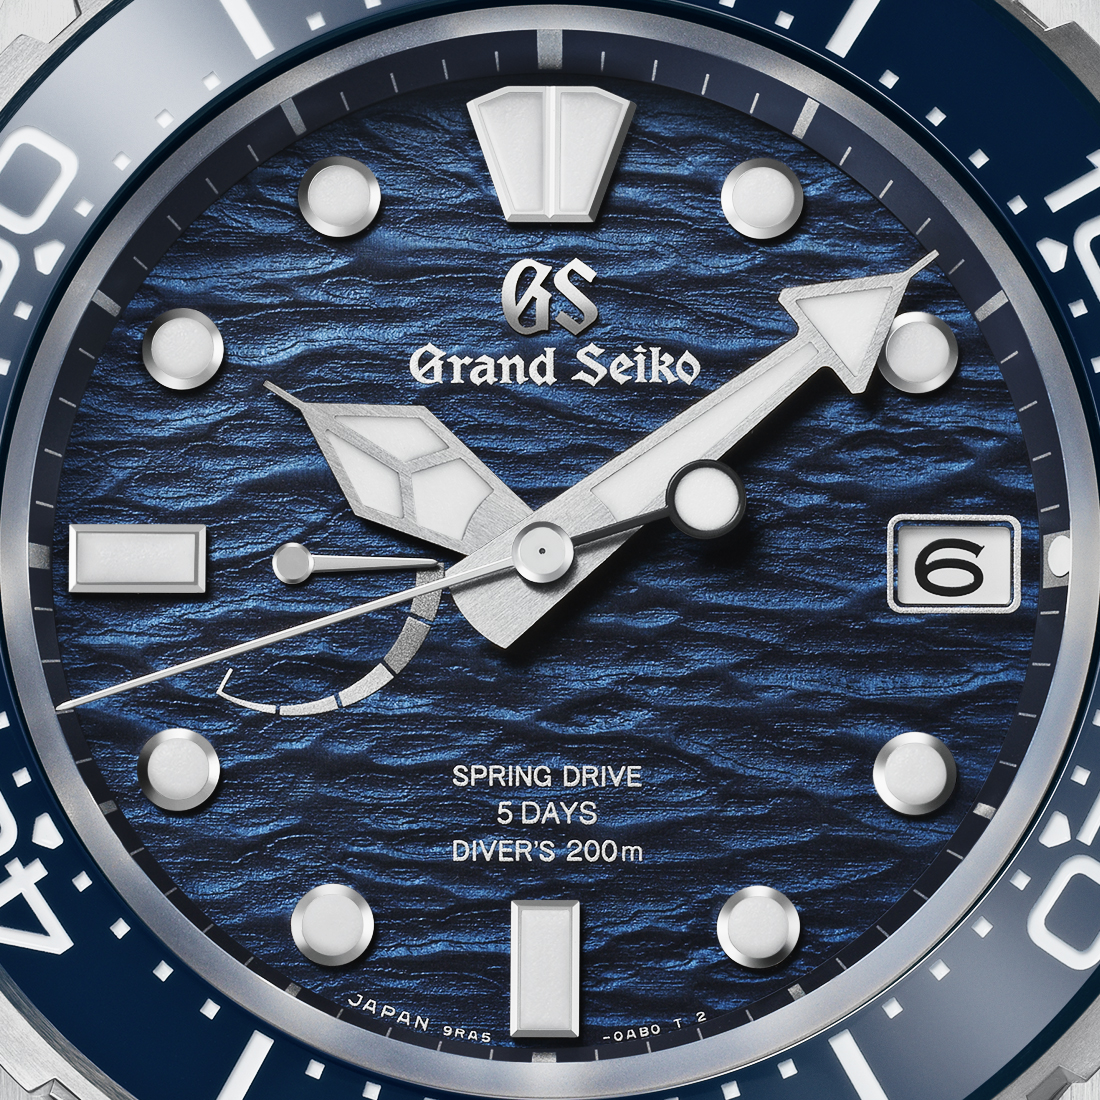 Grand Seiko 'Ushio' Blue - Spring Drive Diver's Watch | Seiko Boutique |  The Official UK Online Store